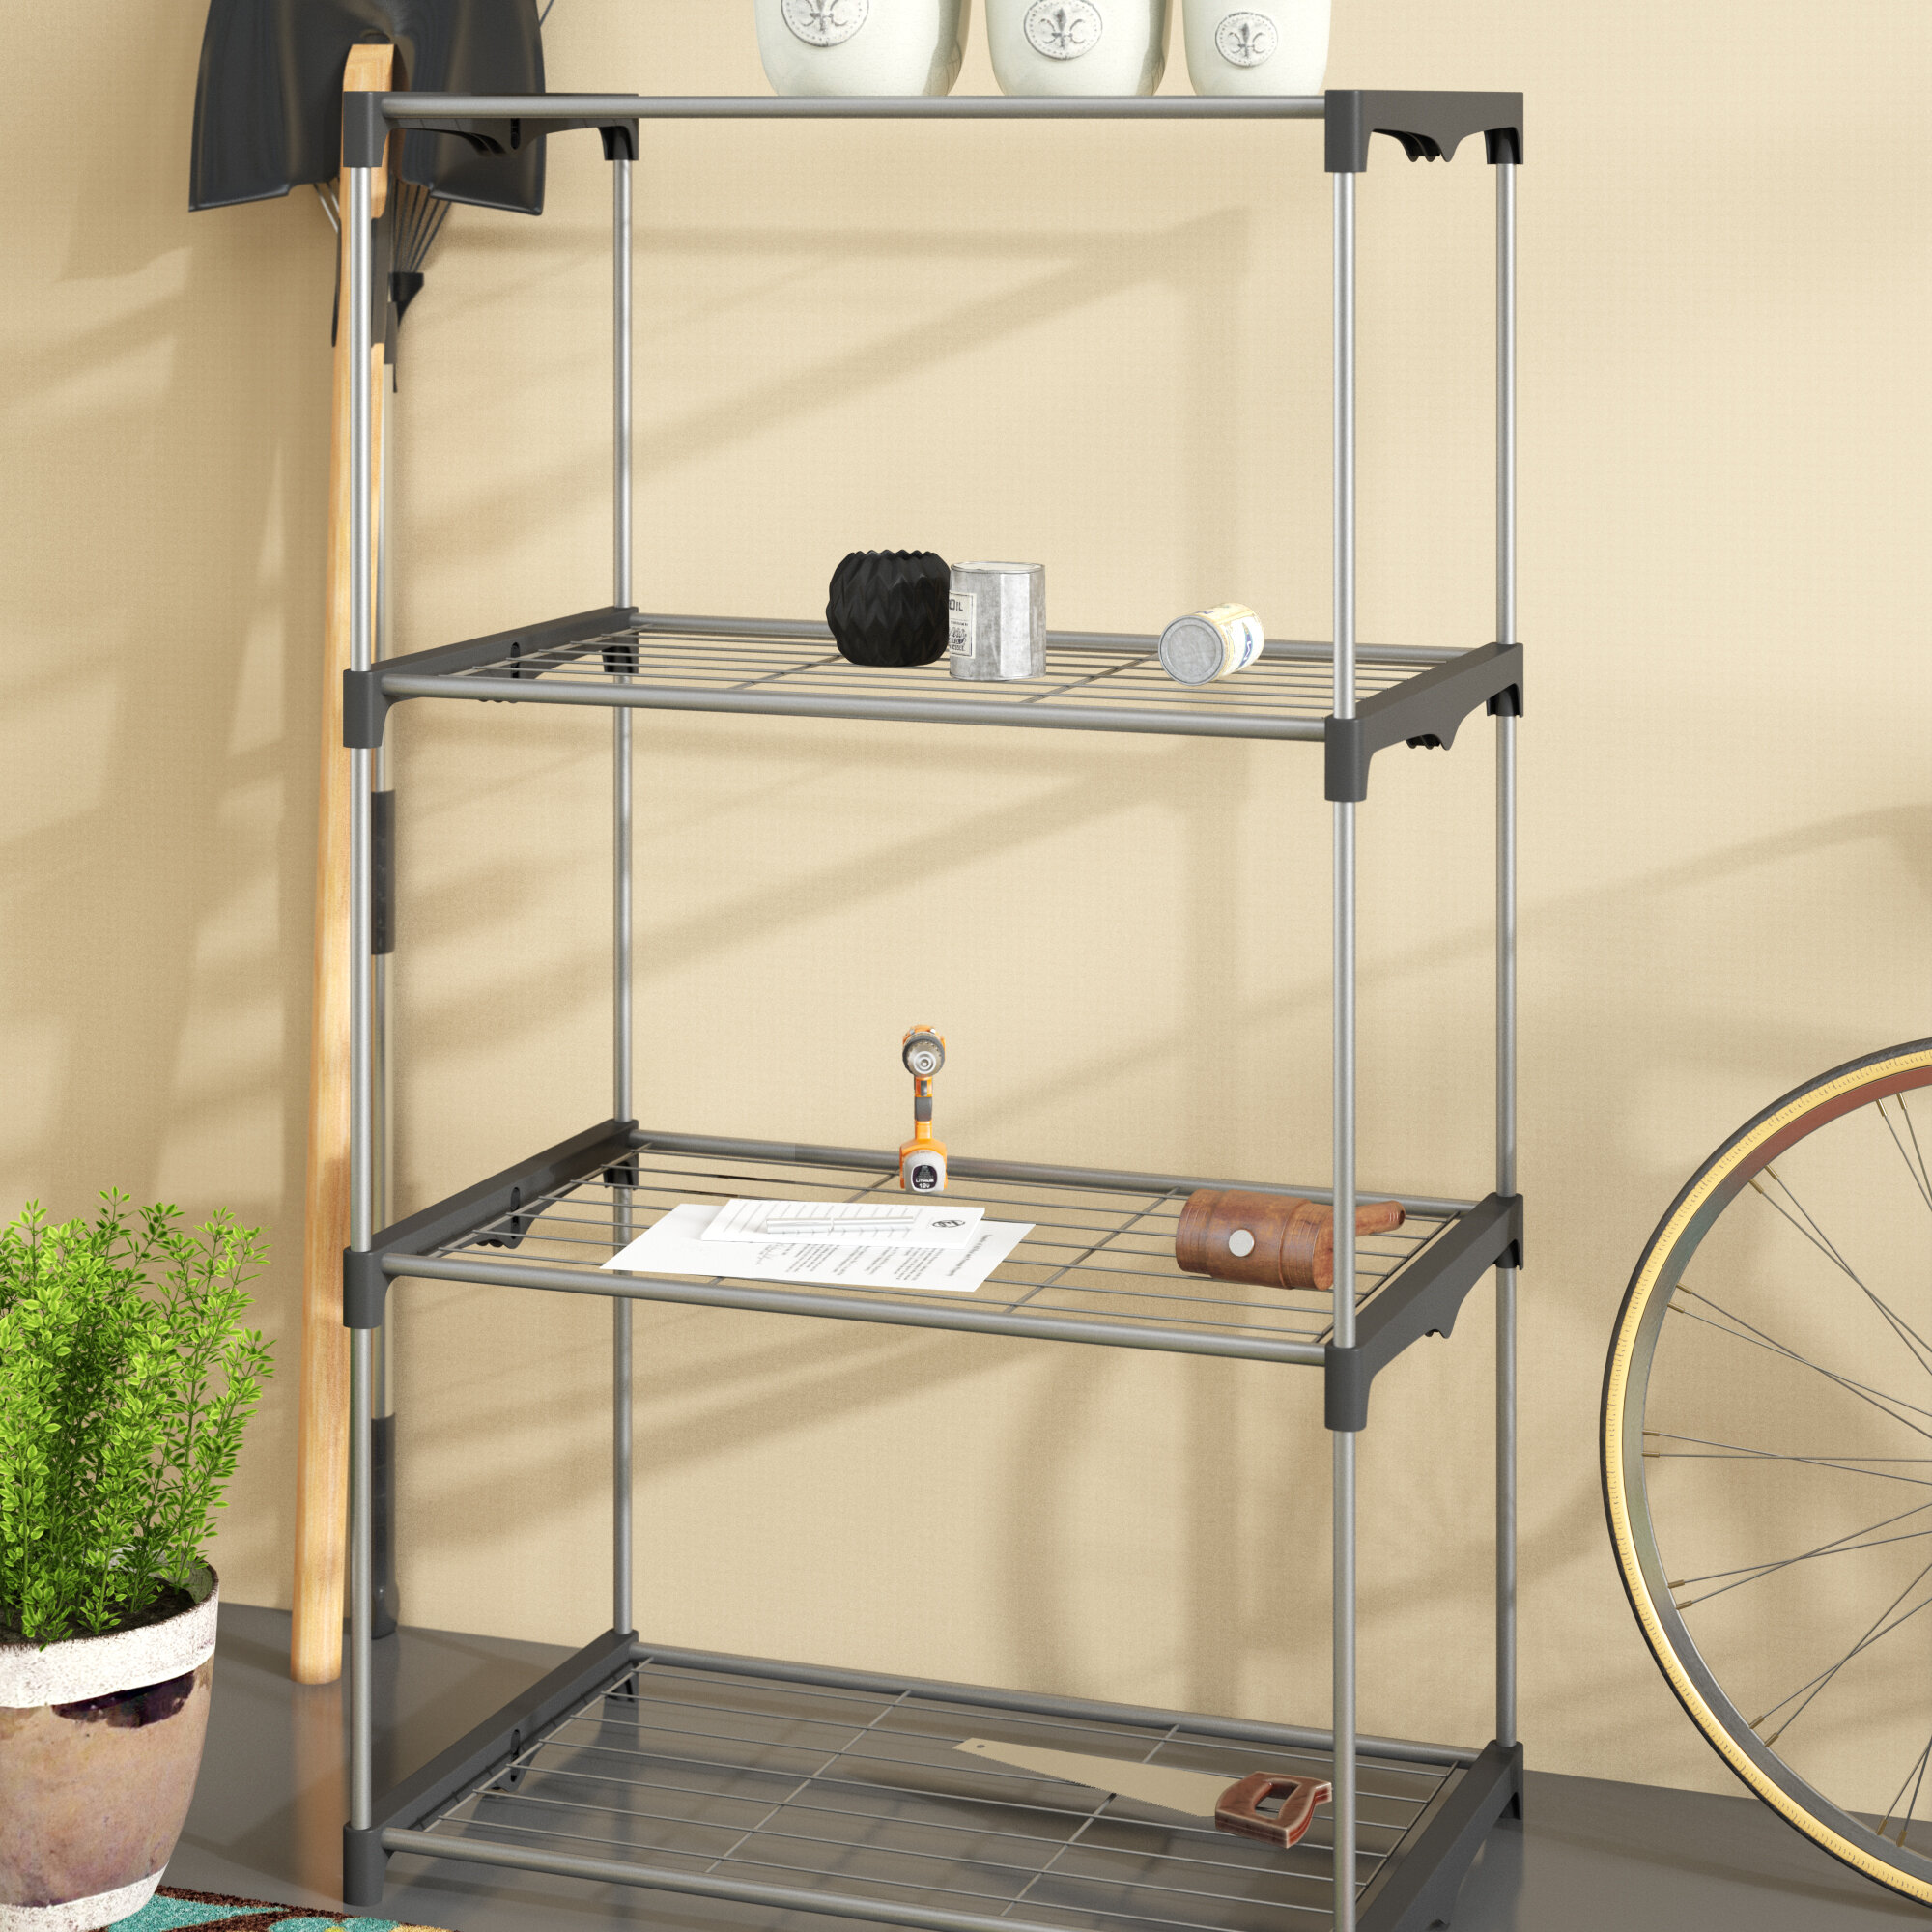 STAINLESS STEEL SHELVES 400 DEEP SIZES FROM 300 TO 1940 .